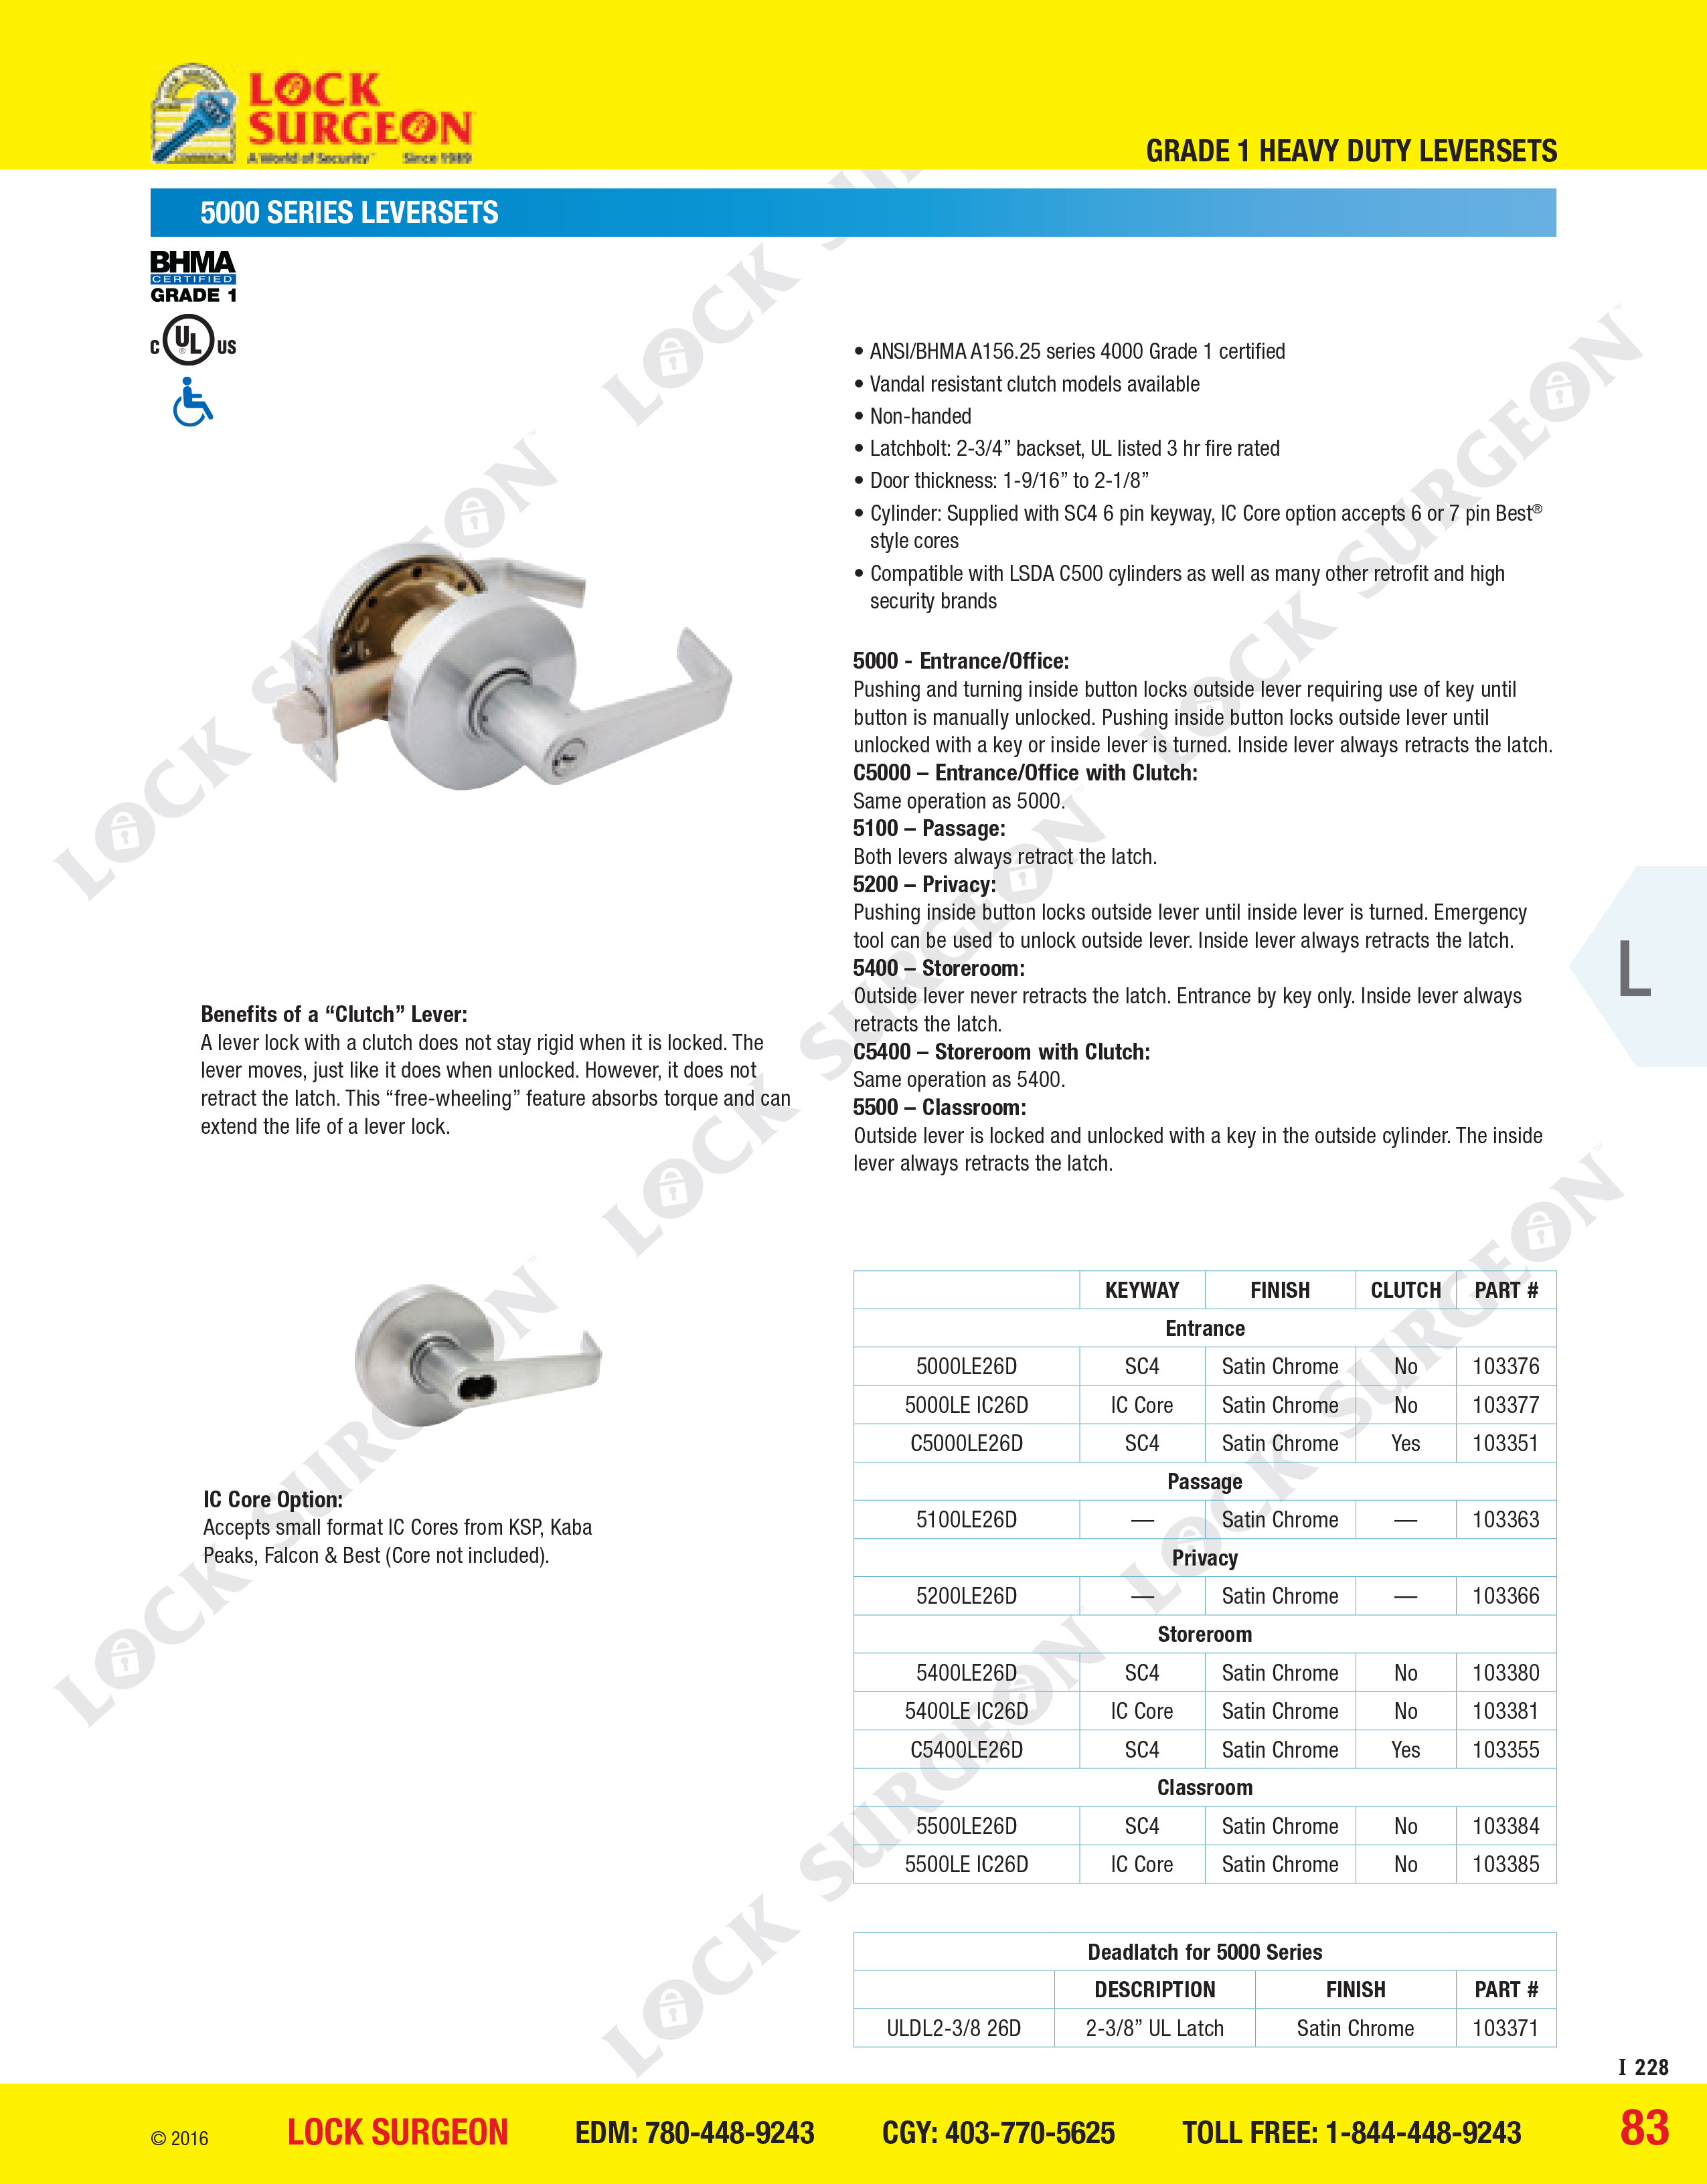 Vandal resistant clutch model, latch-bolt at 2-3/4 inch, fits door thickness 1-9/16 to 2-1/8 inch.